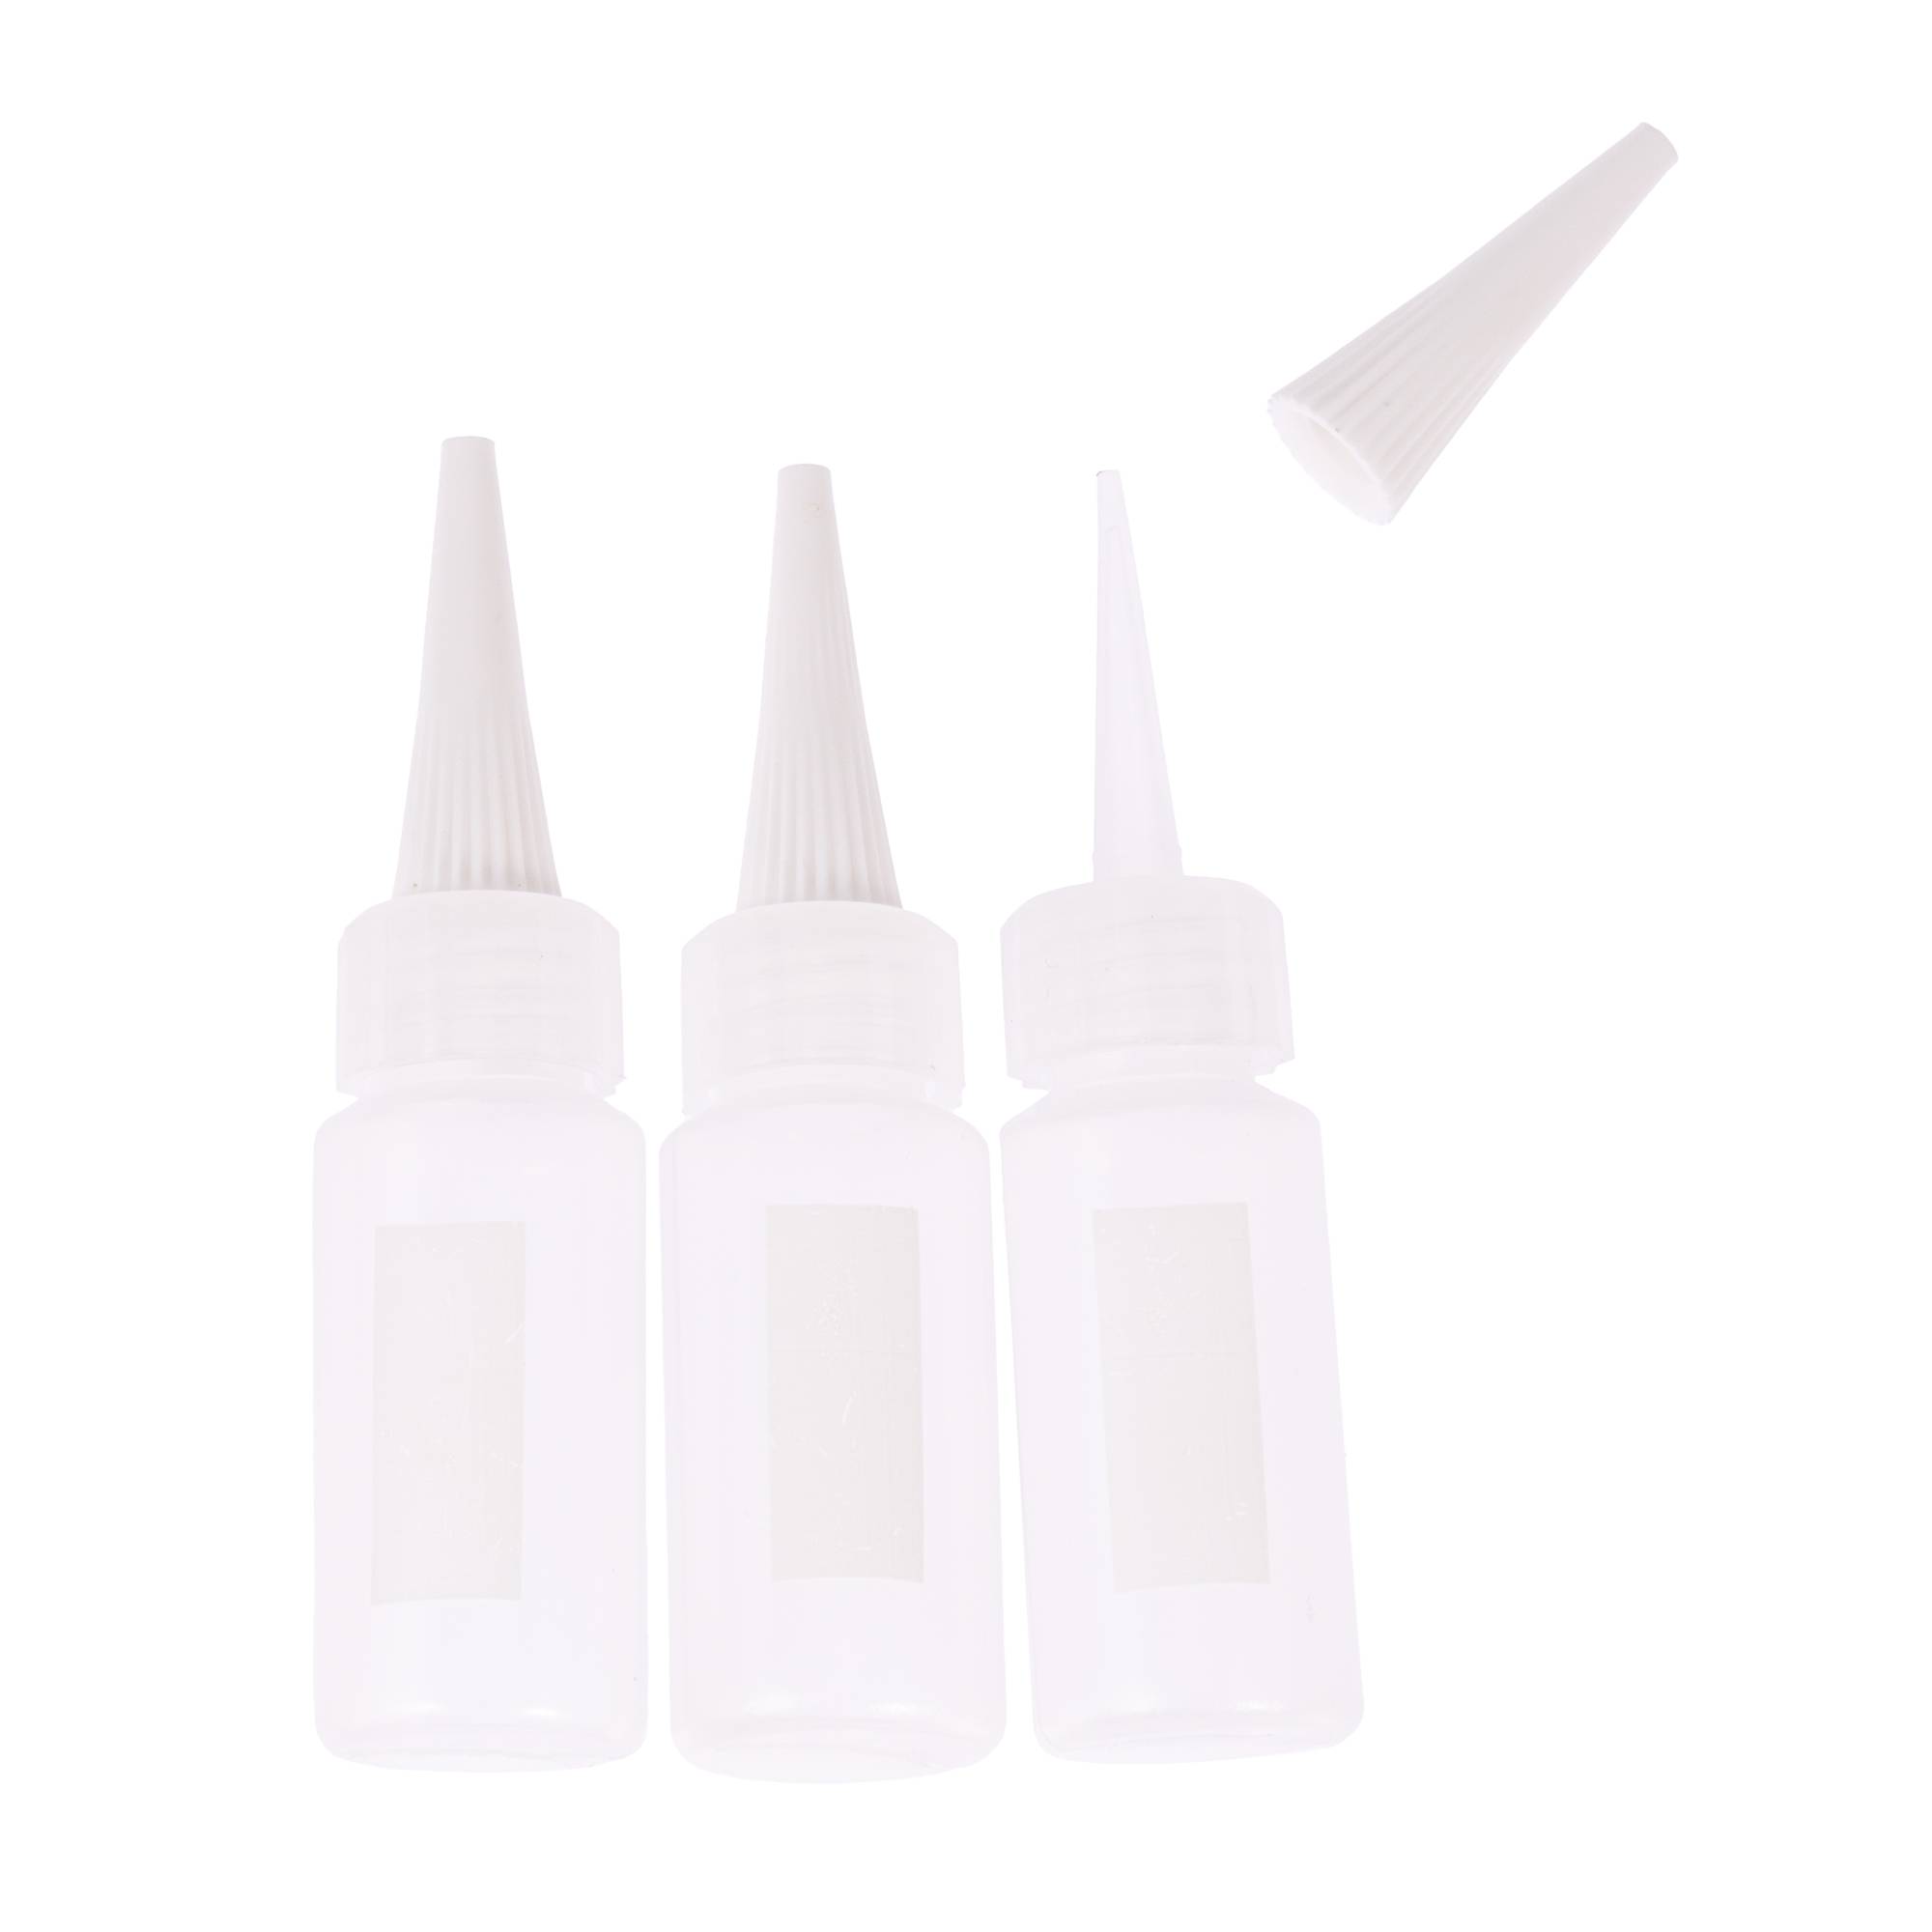 Needle Tip Squeeze Bottles (Pack of 6) Craft Storage